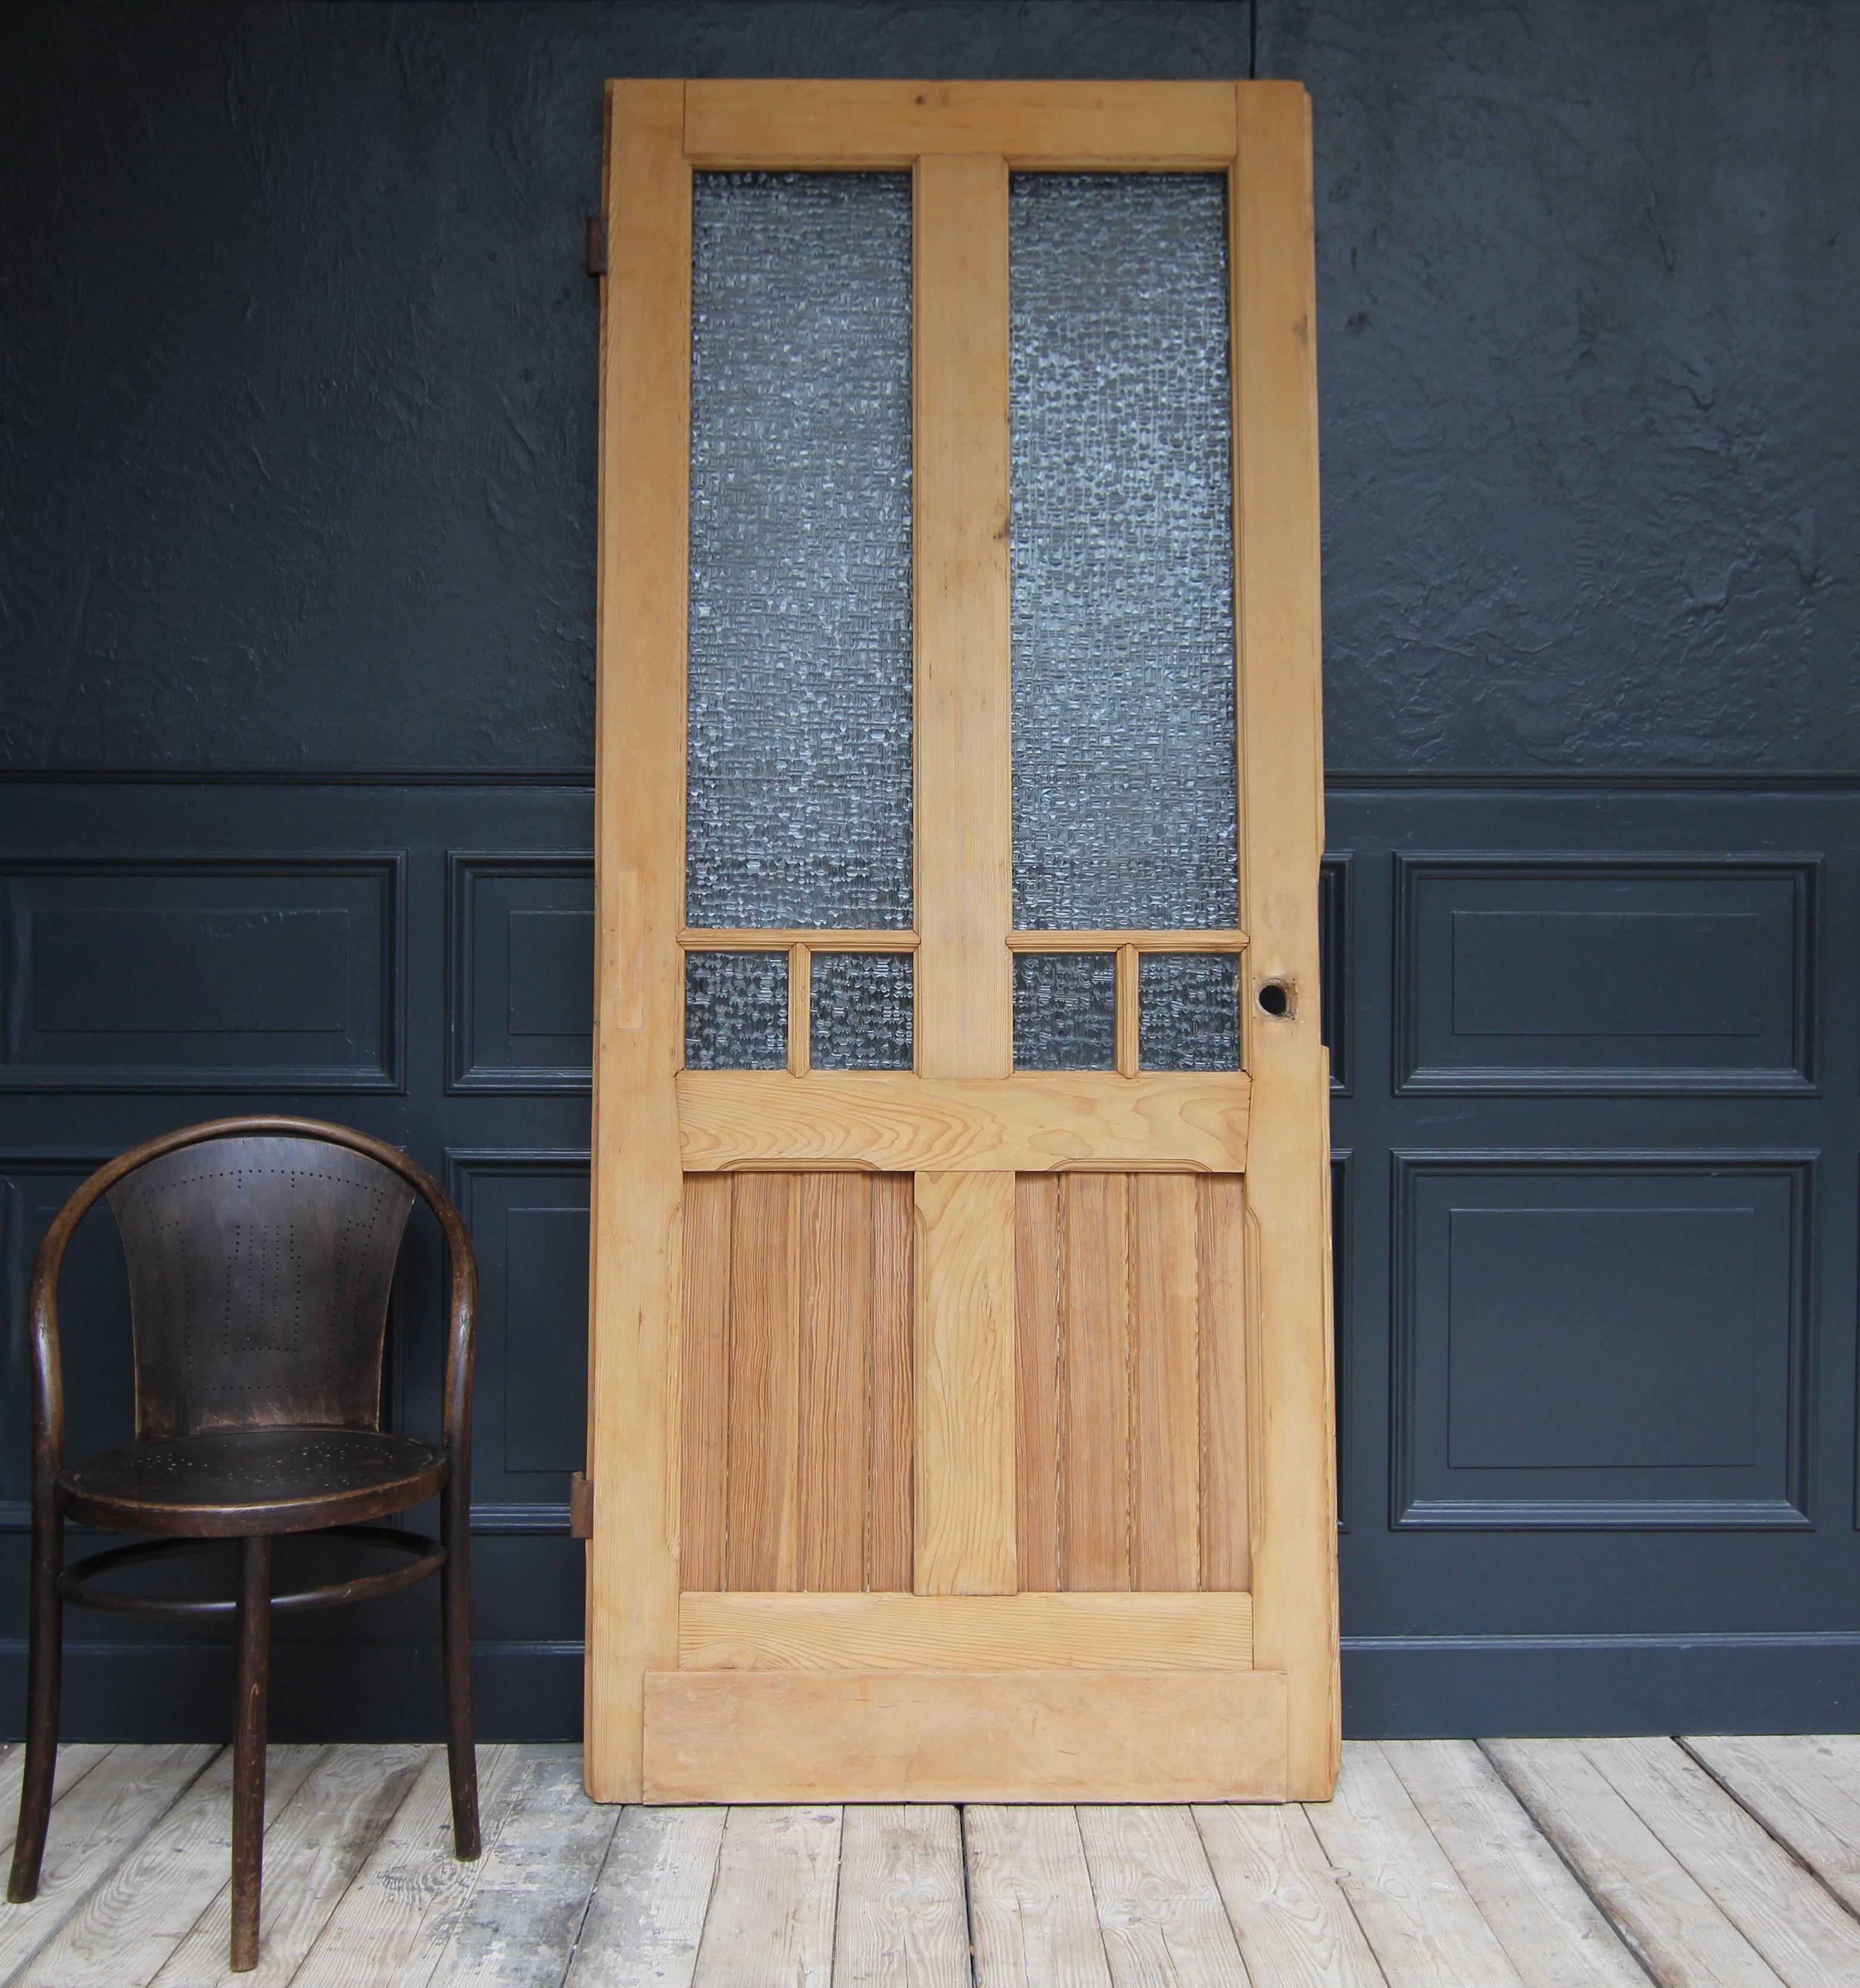 A Art Nouveau door from the early 20th century. Solidly crafted in softwood. 

Frame and panelled construction with ribbed glass and large iron fittings.

Dimensions: 
222 cm high / 87.40 inch high,
94 cm wide / 37,00 inch wide,
3.5 cm thick / 1.37